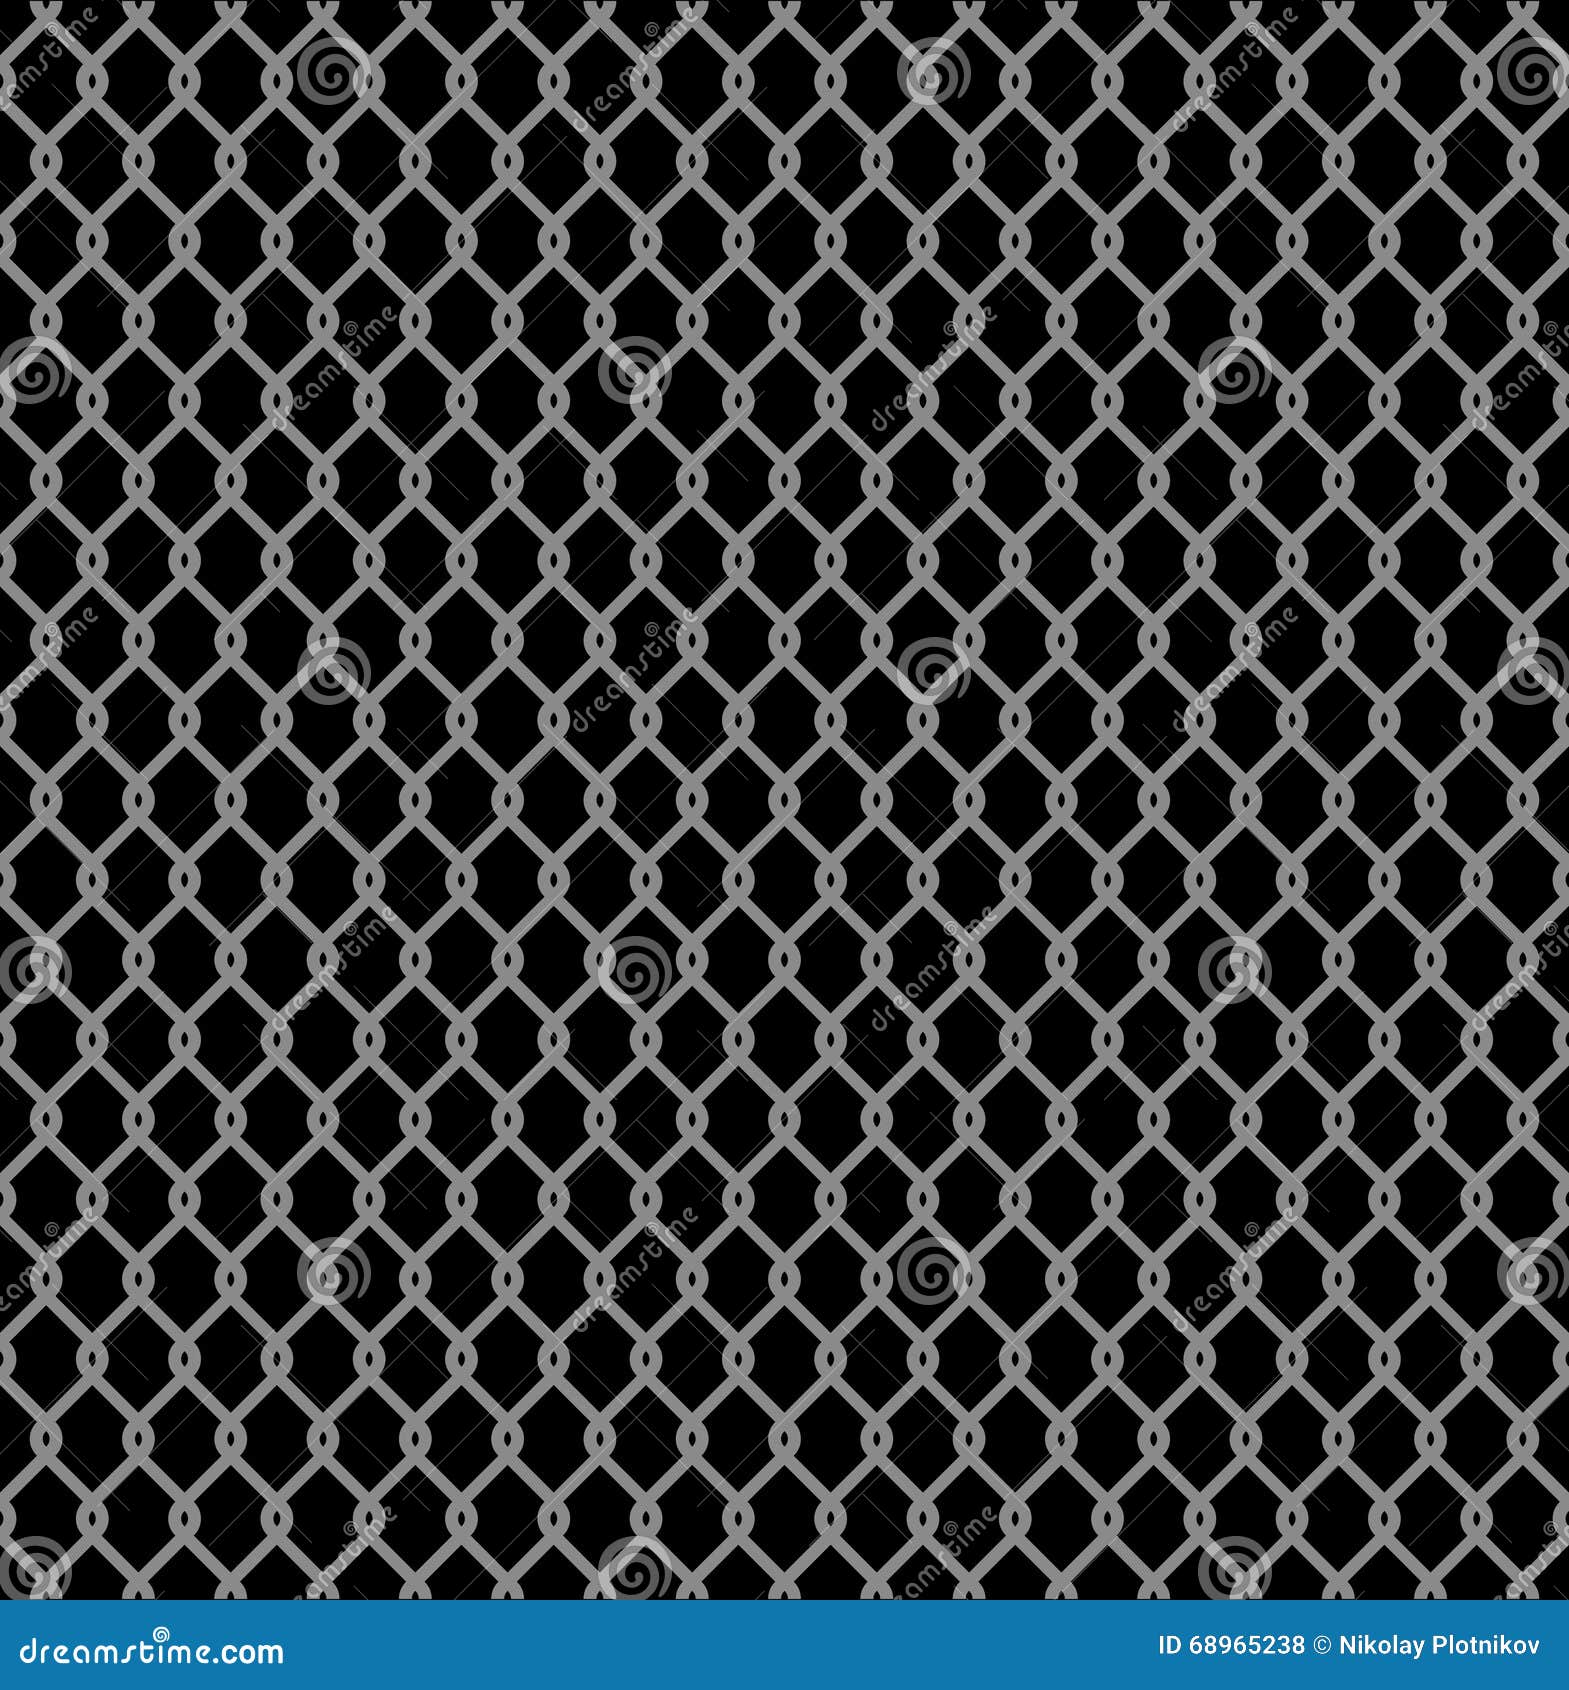 Metallic Wired Fence Seamless Pattern Isolated on Black Background